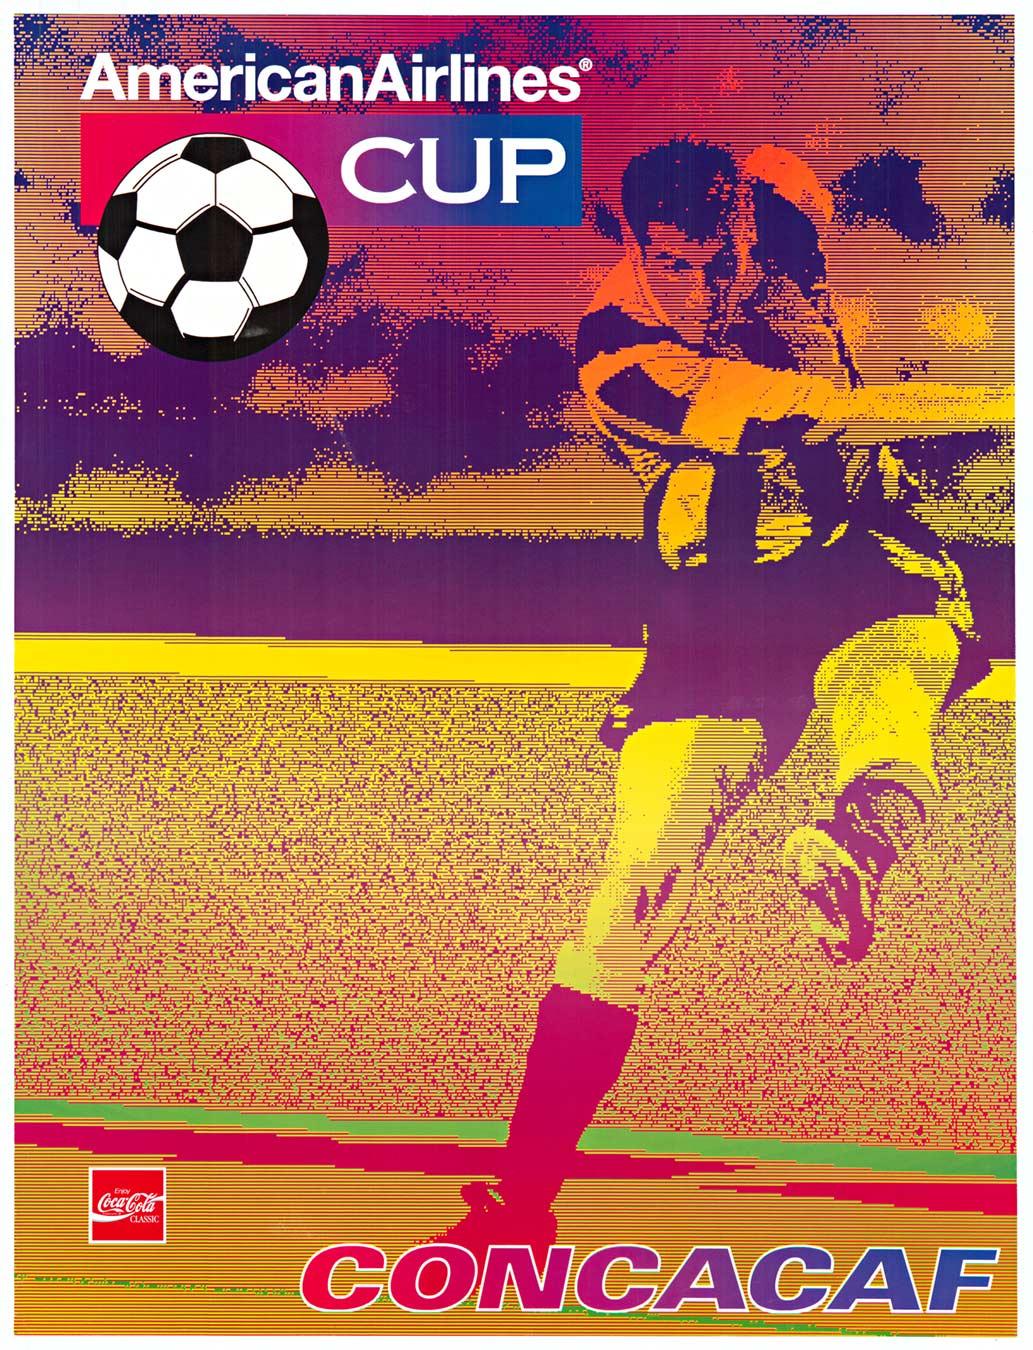 Unknown Portrait Print - CONCACAF Cup, American Airlines vintage travel poster  Soccer